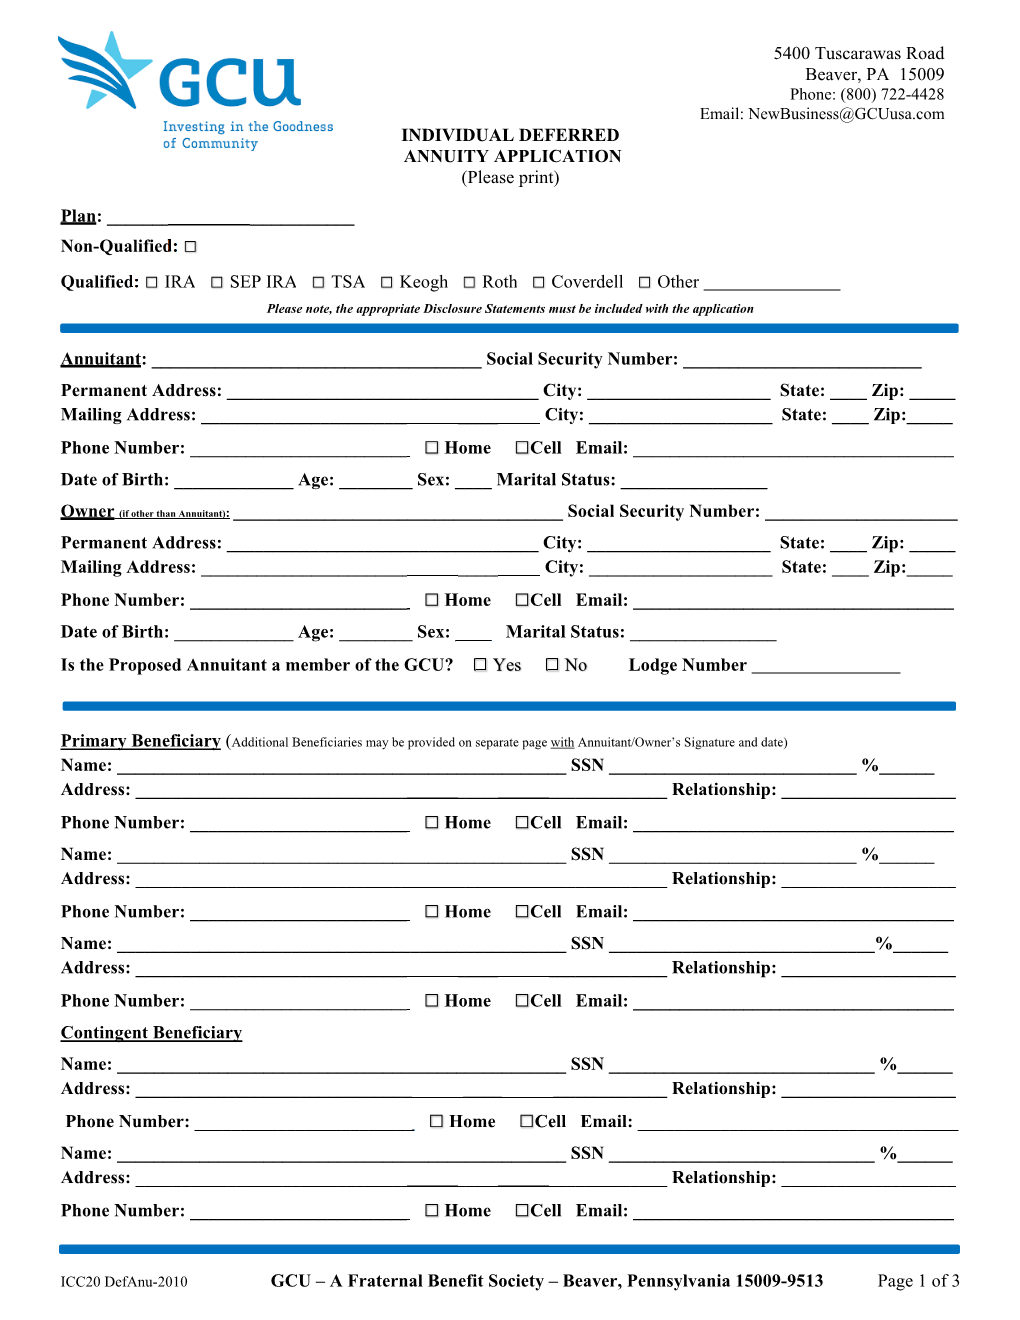 A Fraternal Benefit Society – Beaver, Pennsylvania 15009-9513 Page 1 of 3